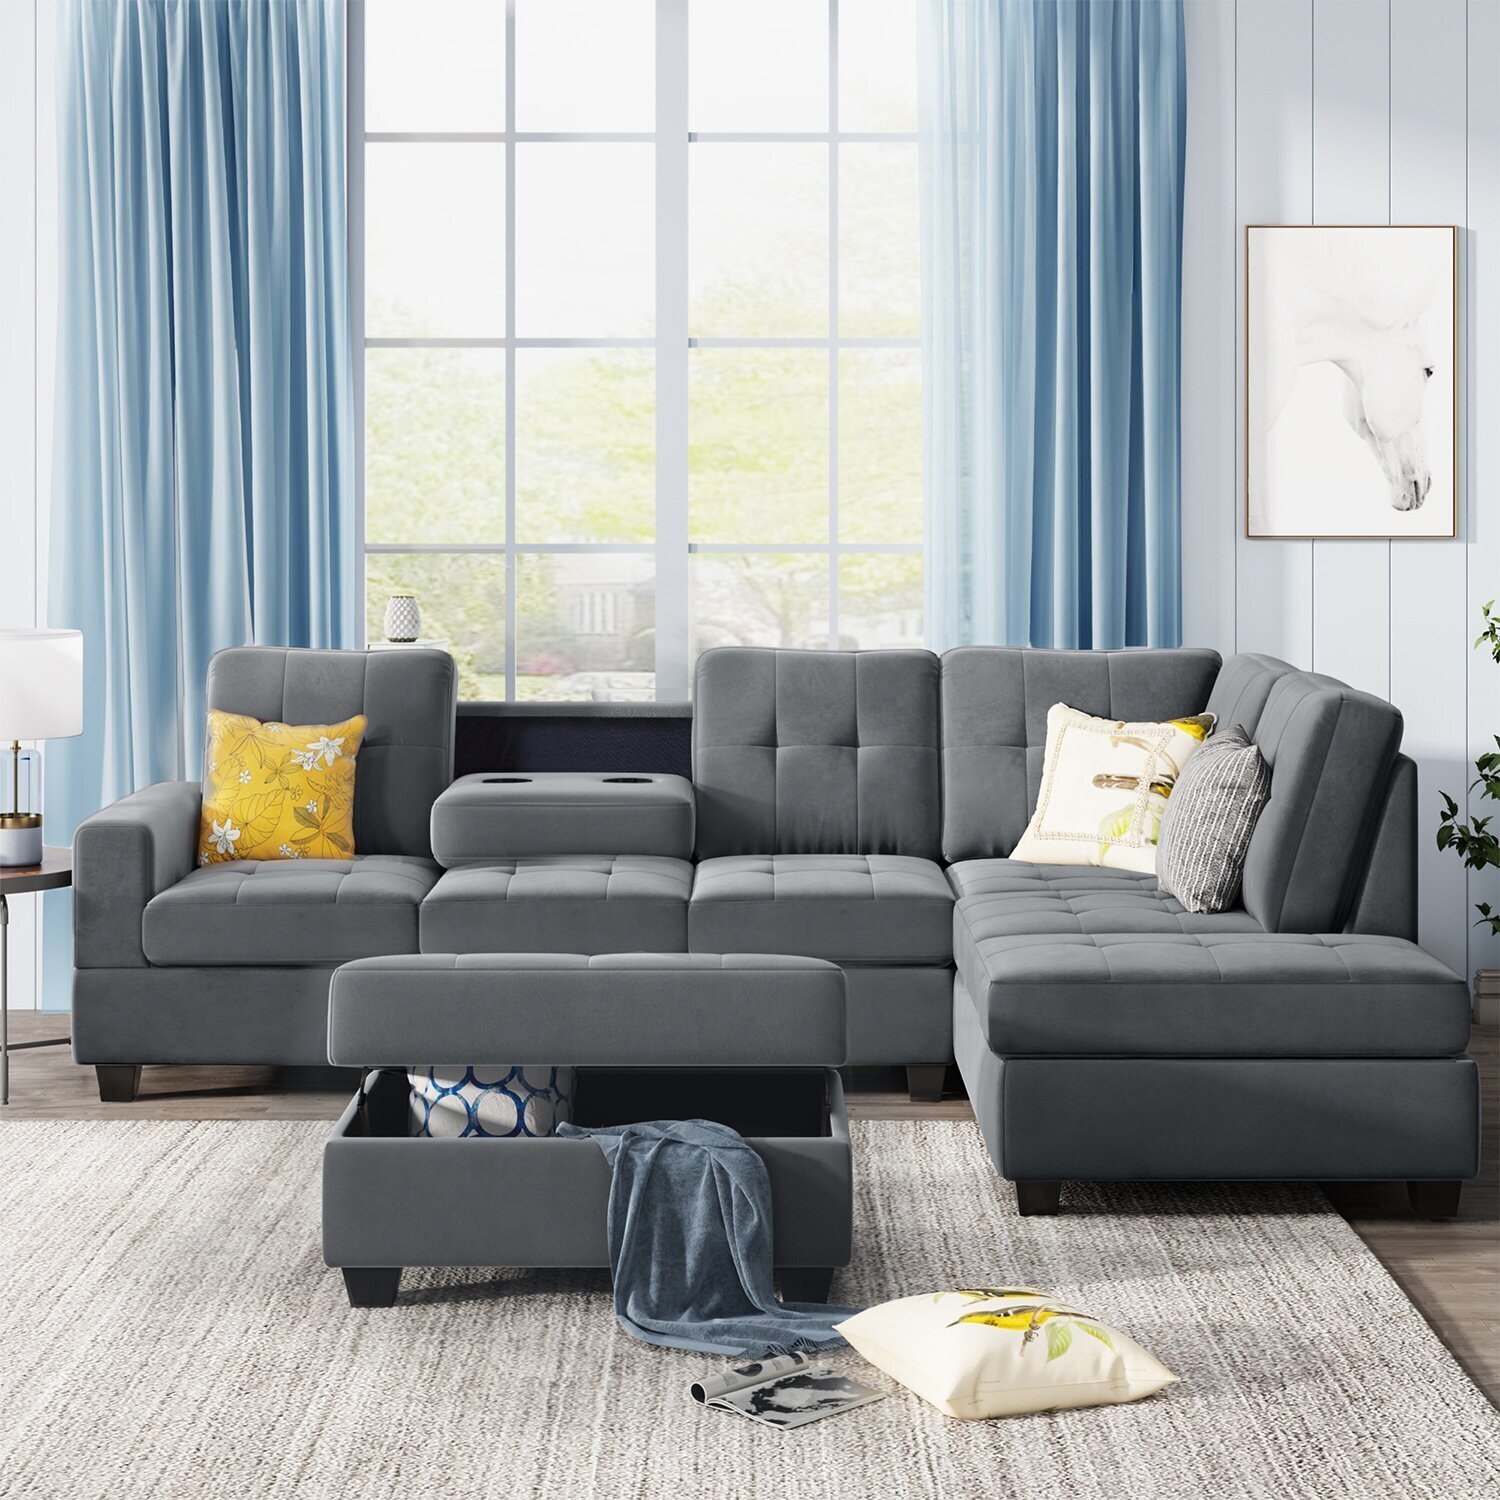 Three Piece Gray Microfiber Sectional Couch